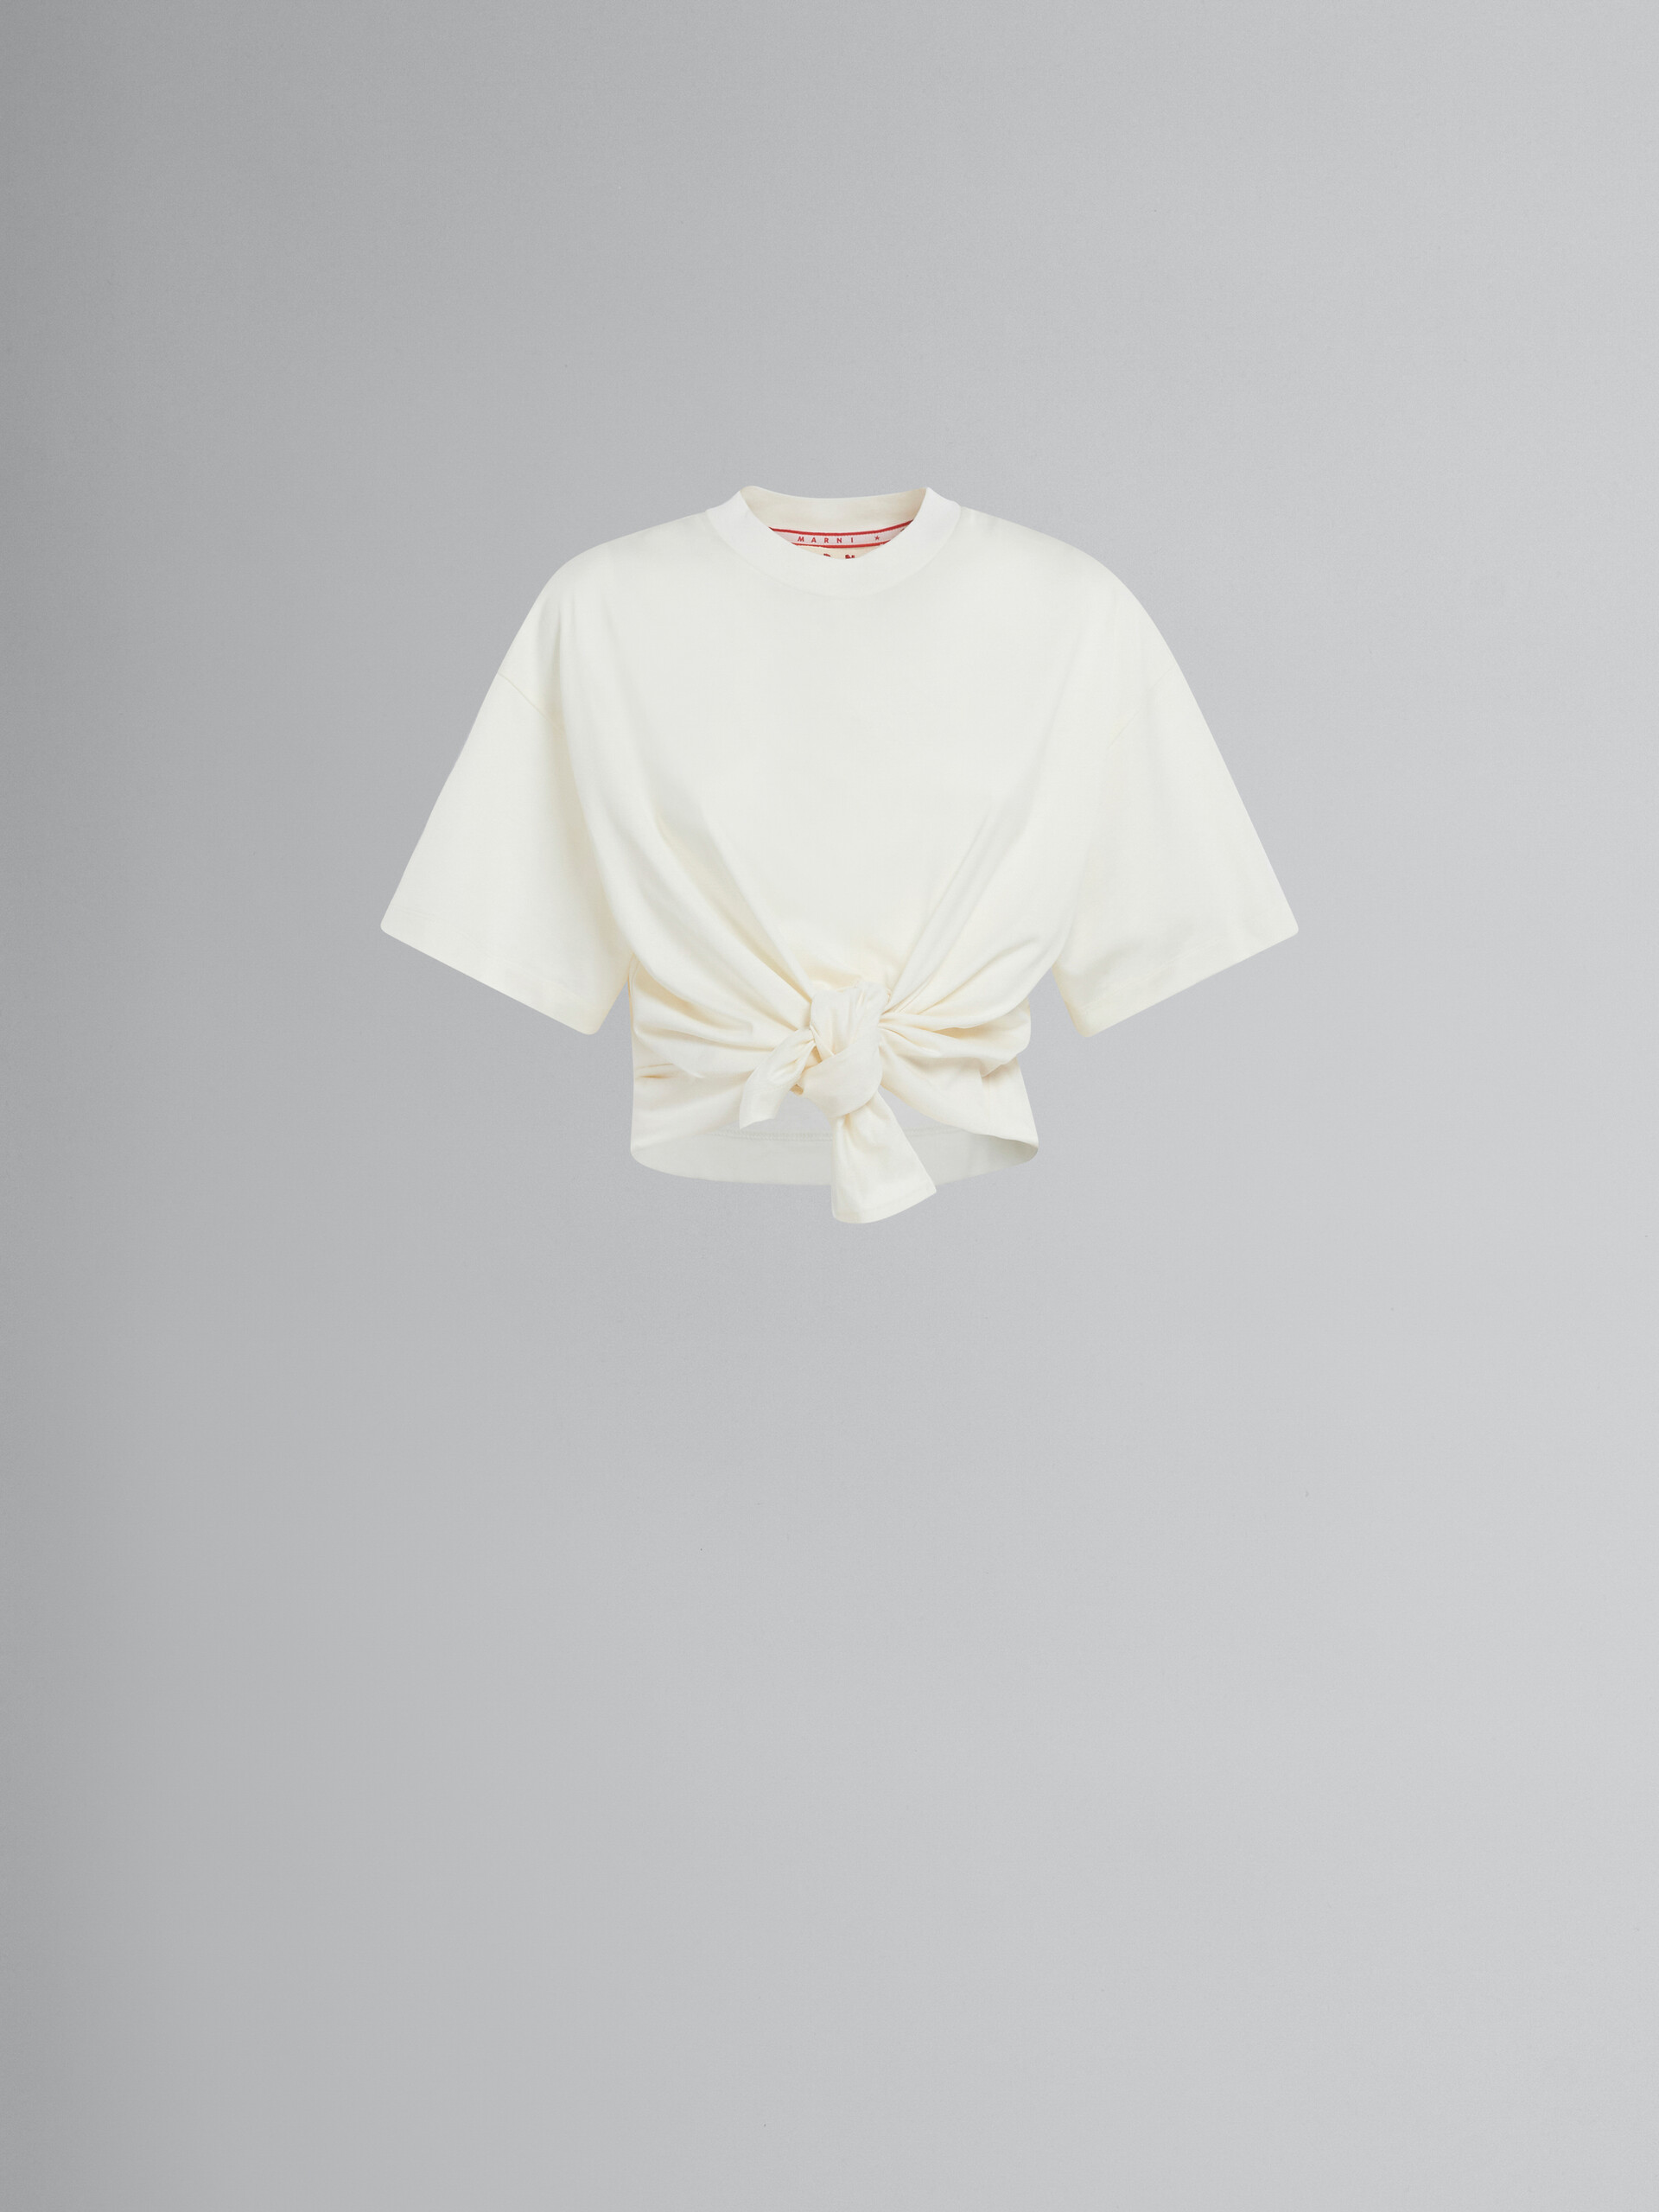 Marni x No Vacancy Inn - White T-shirt in bio cotton jersey with knot - T-shirts - Image 1